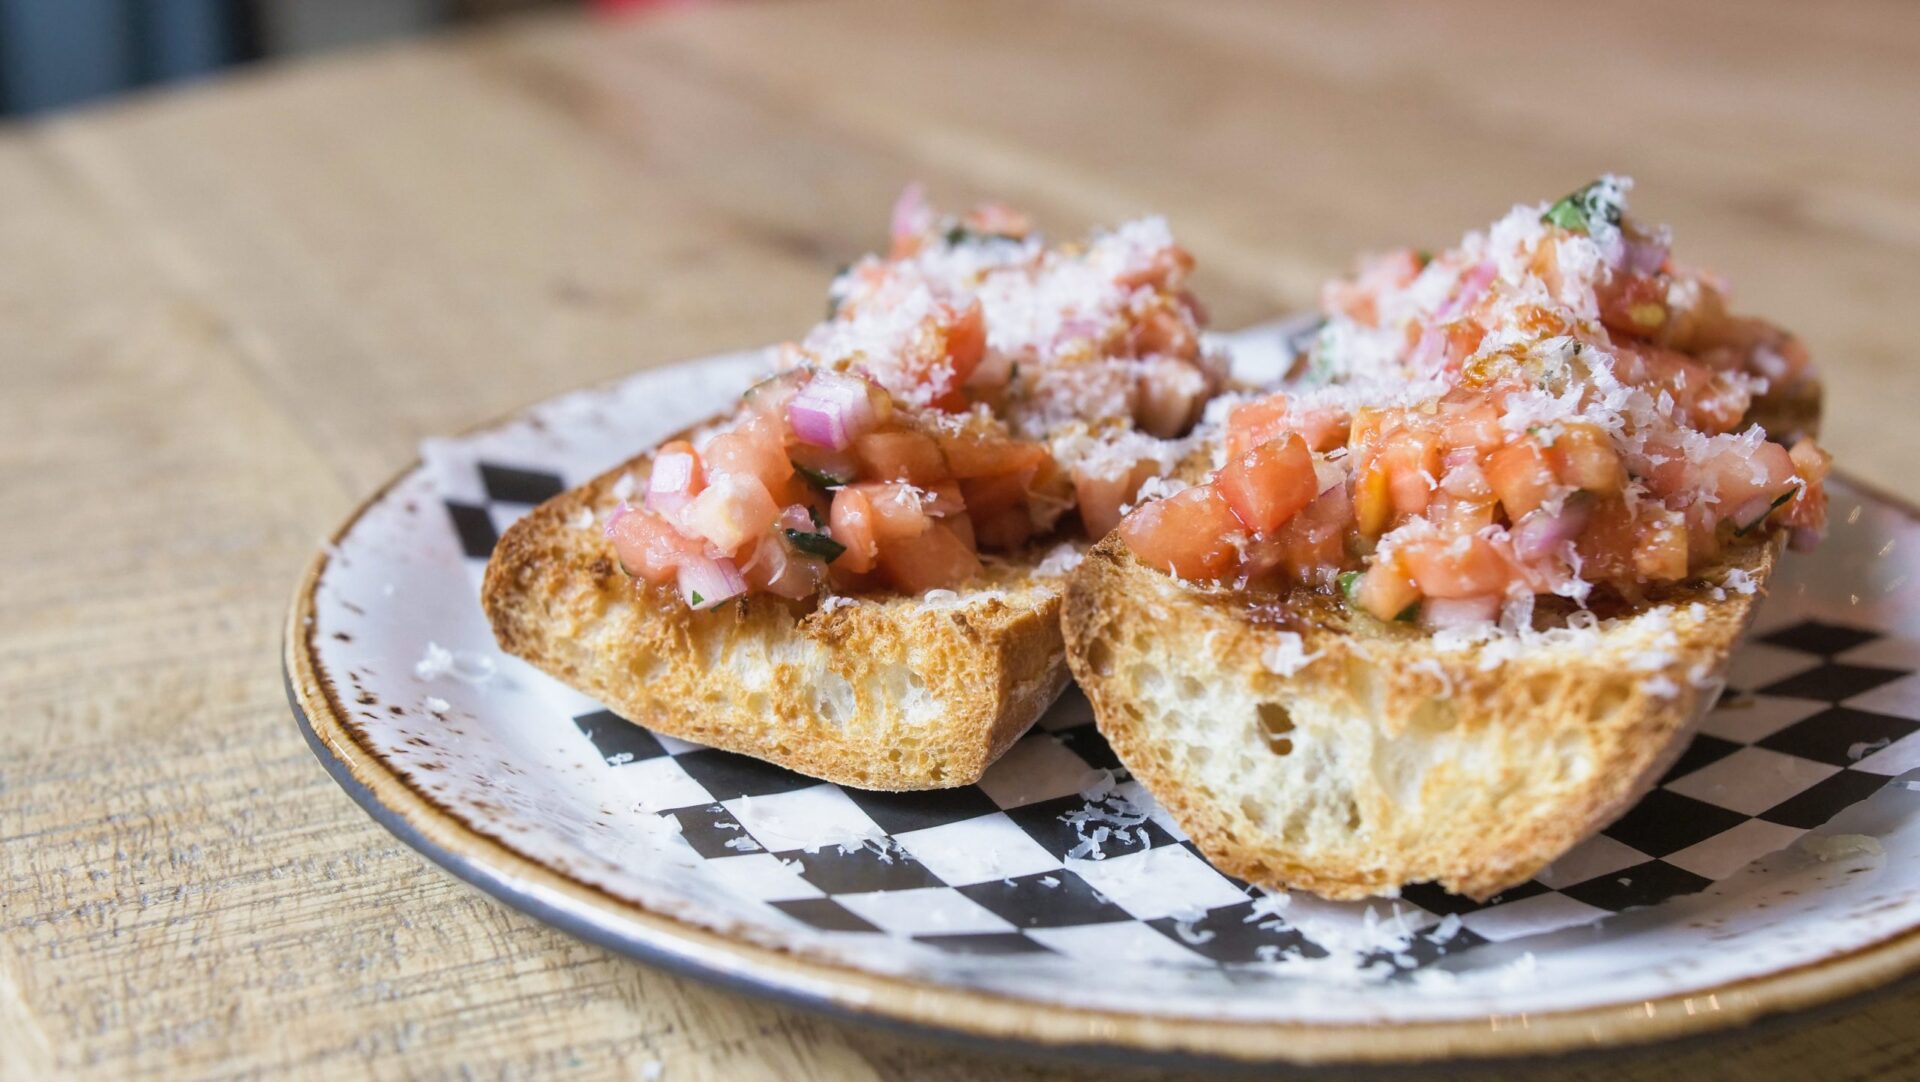 A plate with 2 pieces of bruschetta